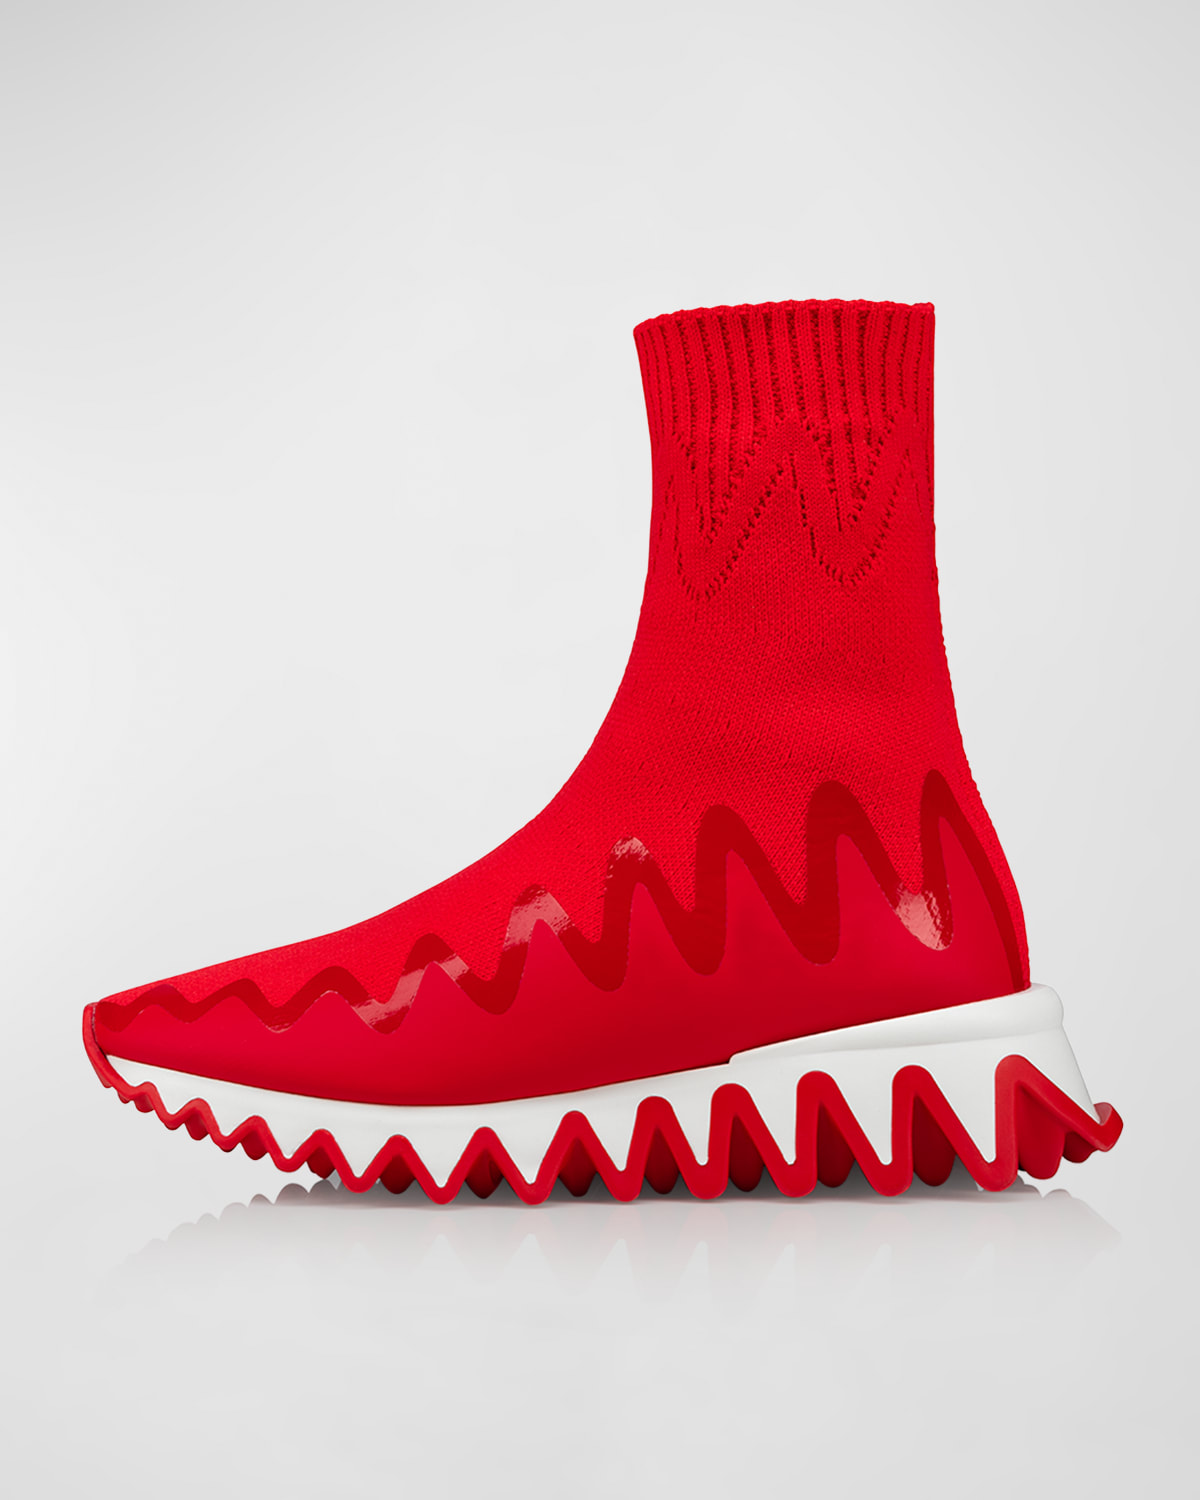 CHRISTIAN LOUBOUTIN KID'S SHARKY PULL-ON SOCK SNEAKERS, TODDLERS/KIDS